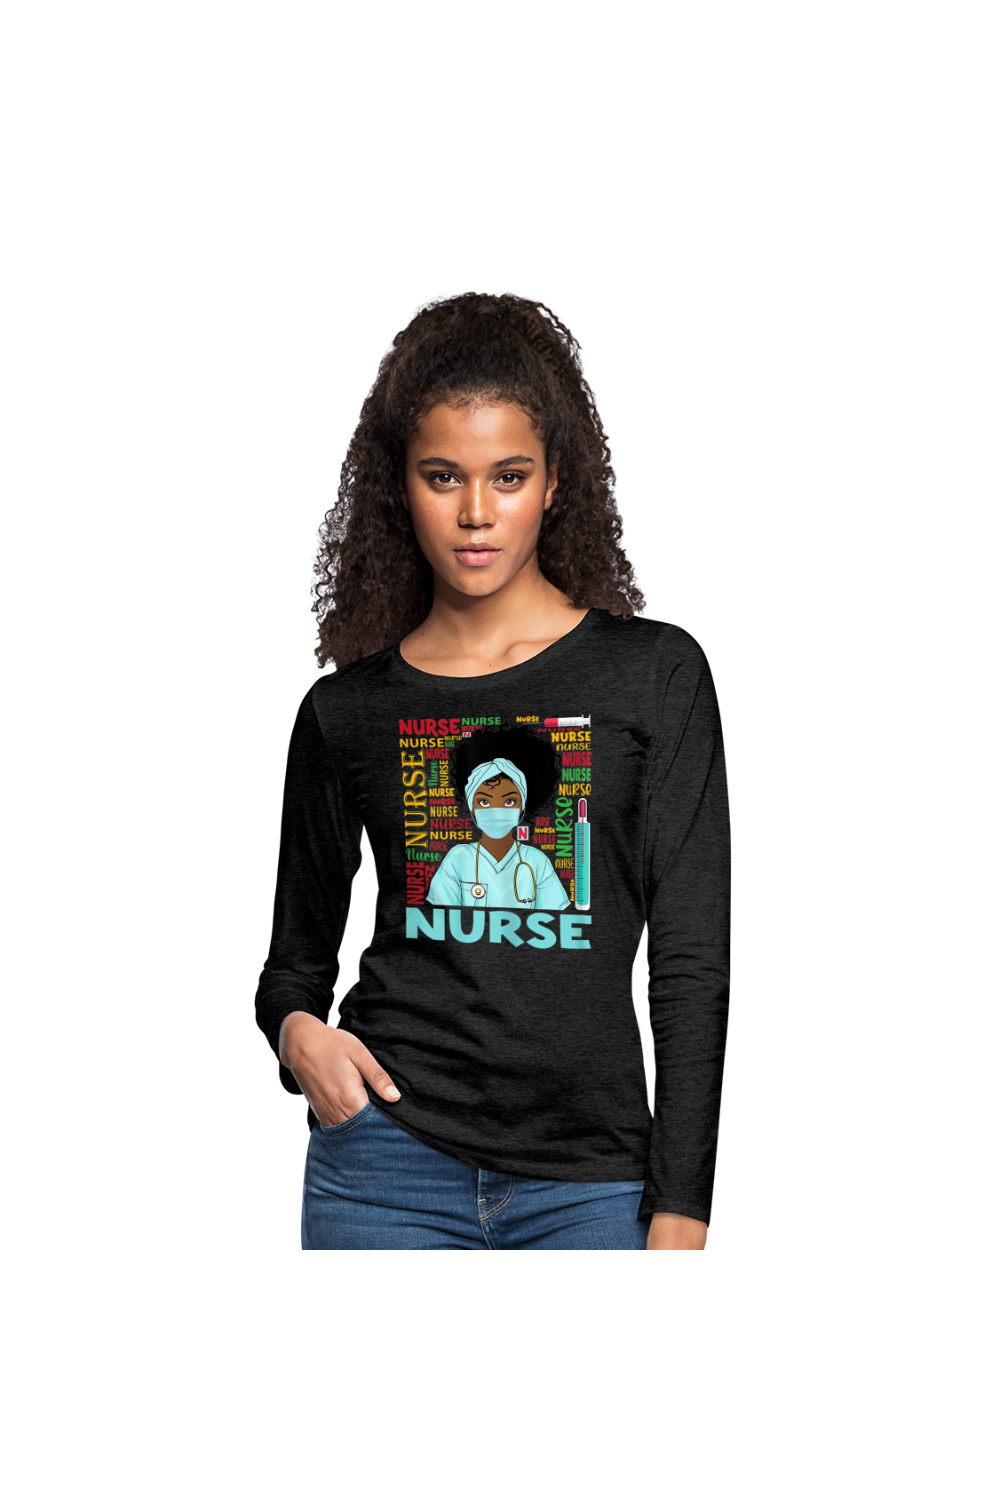 African American Women's Nurse Wearing A Face Mask Long Sleeve T-Shirt Plus Sizes Available - NicholesGifts